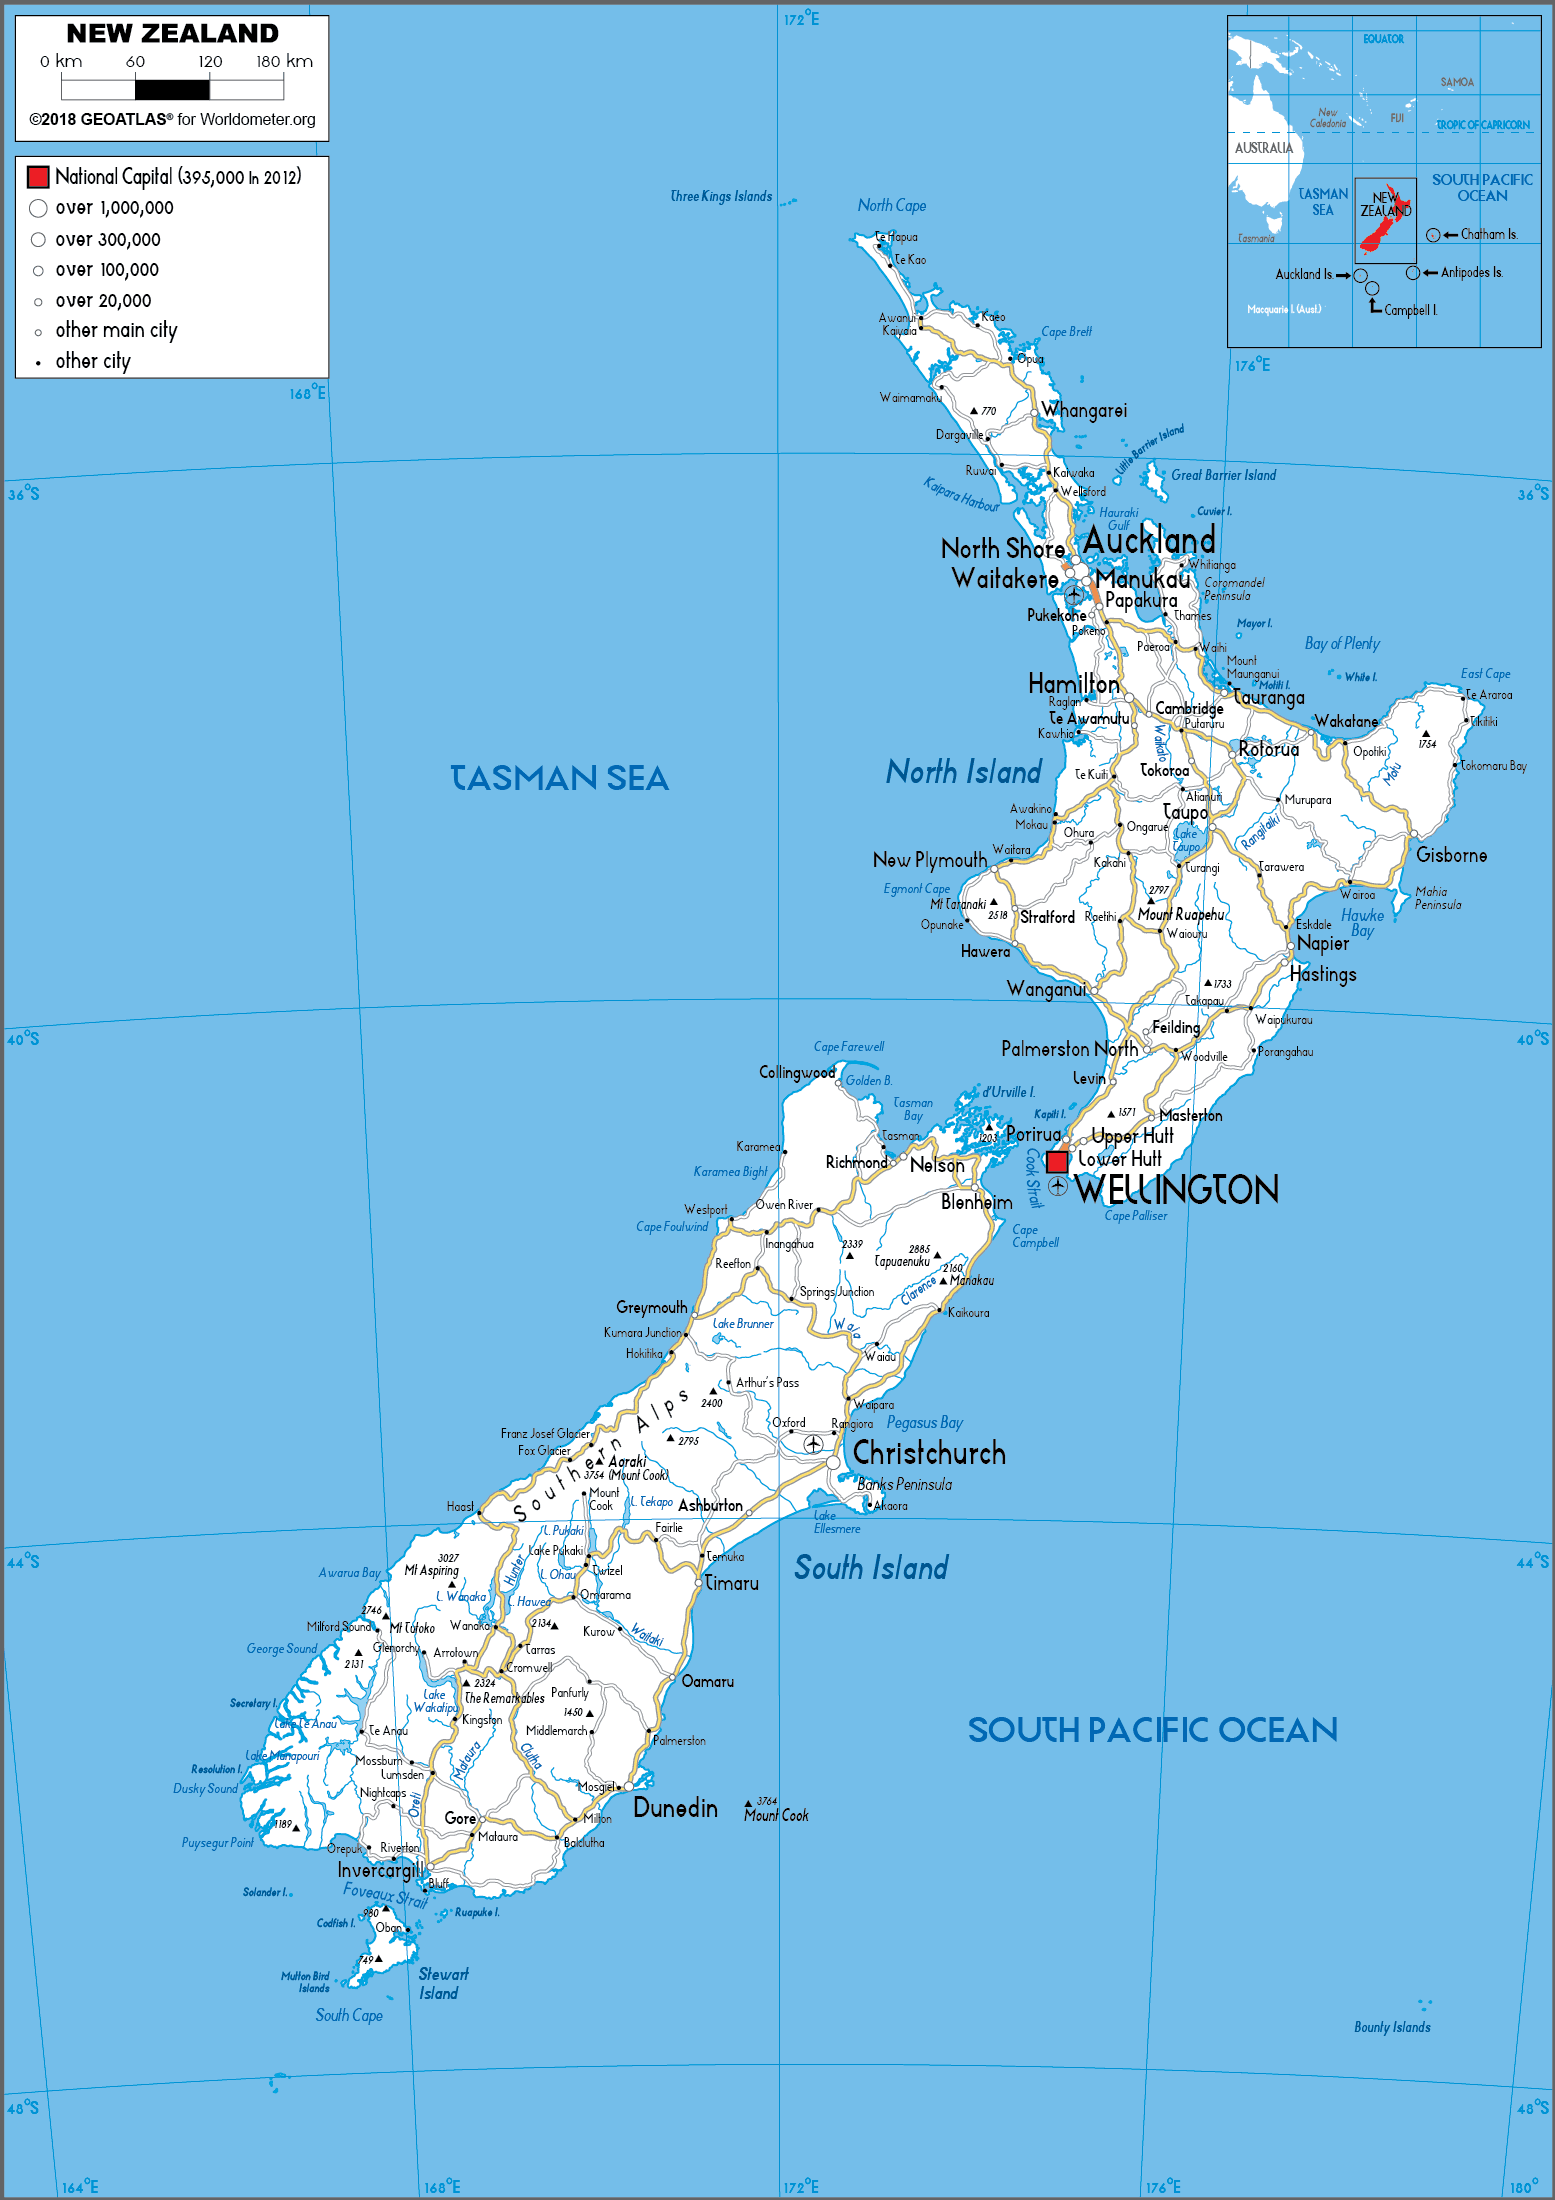 large-size-road-map-of-new-zealand-worldometer